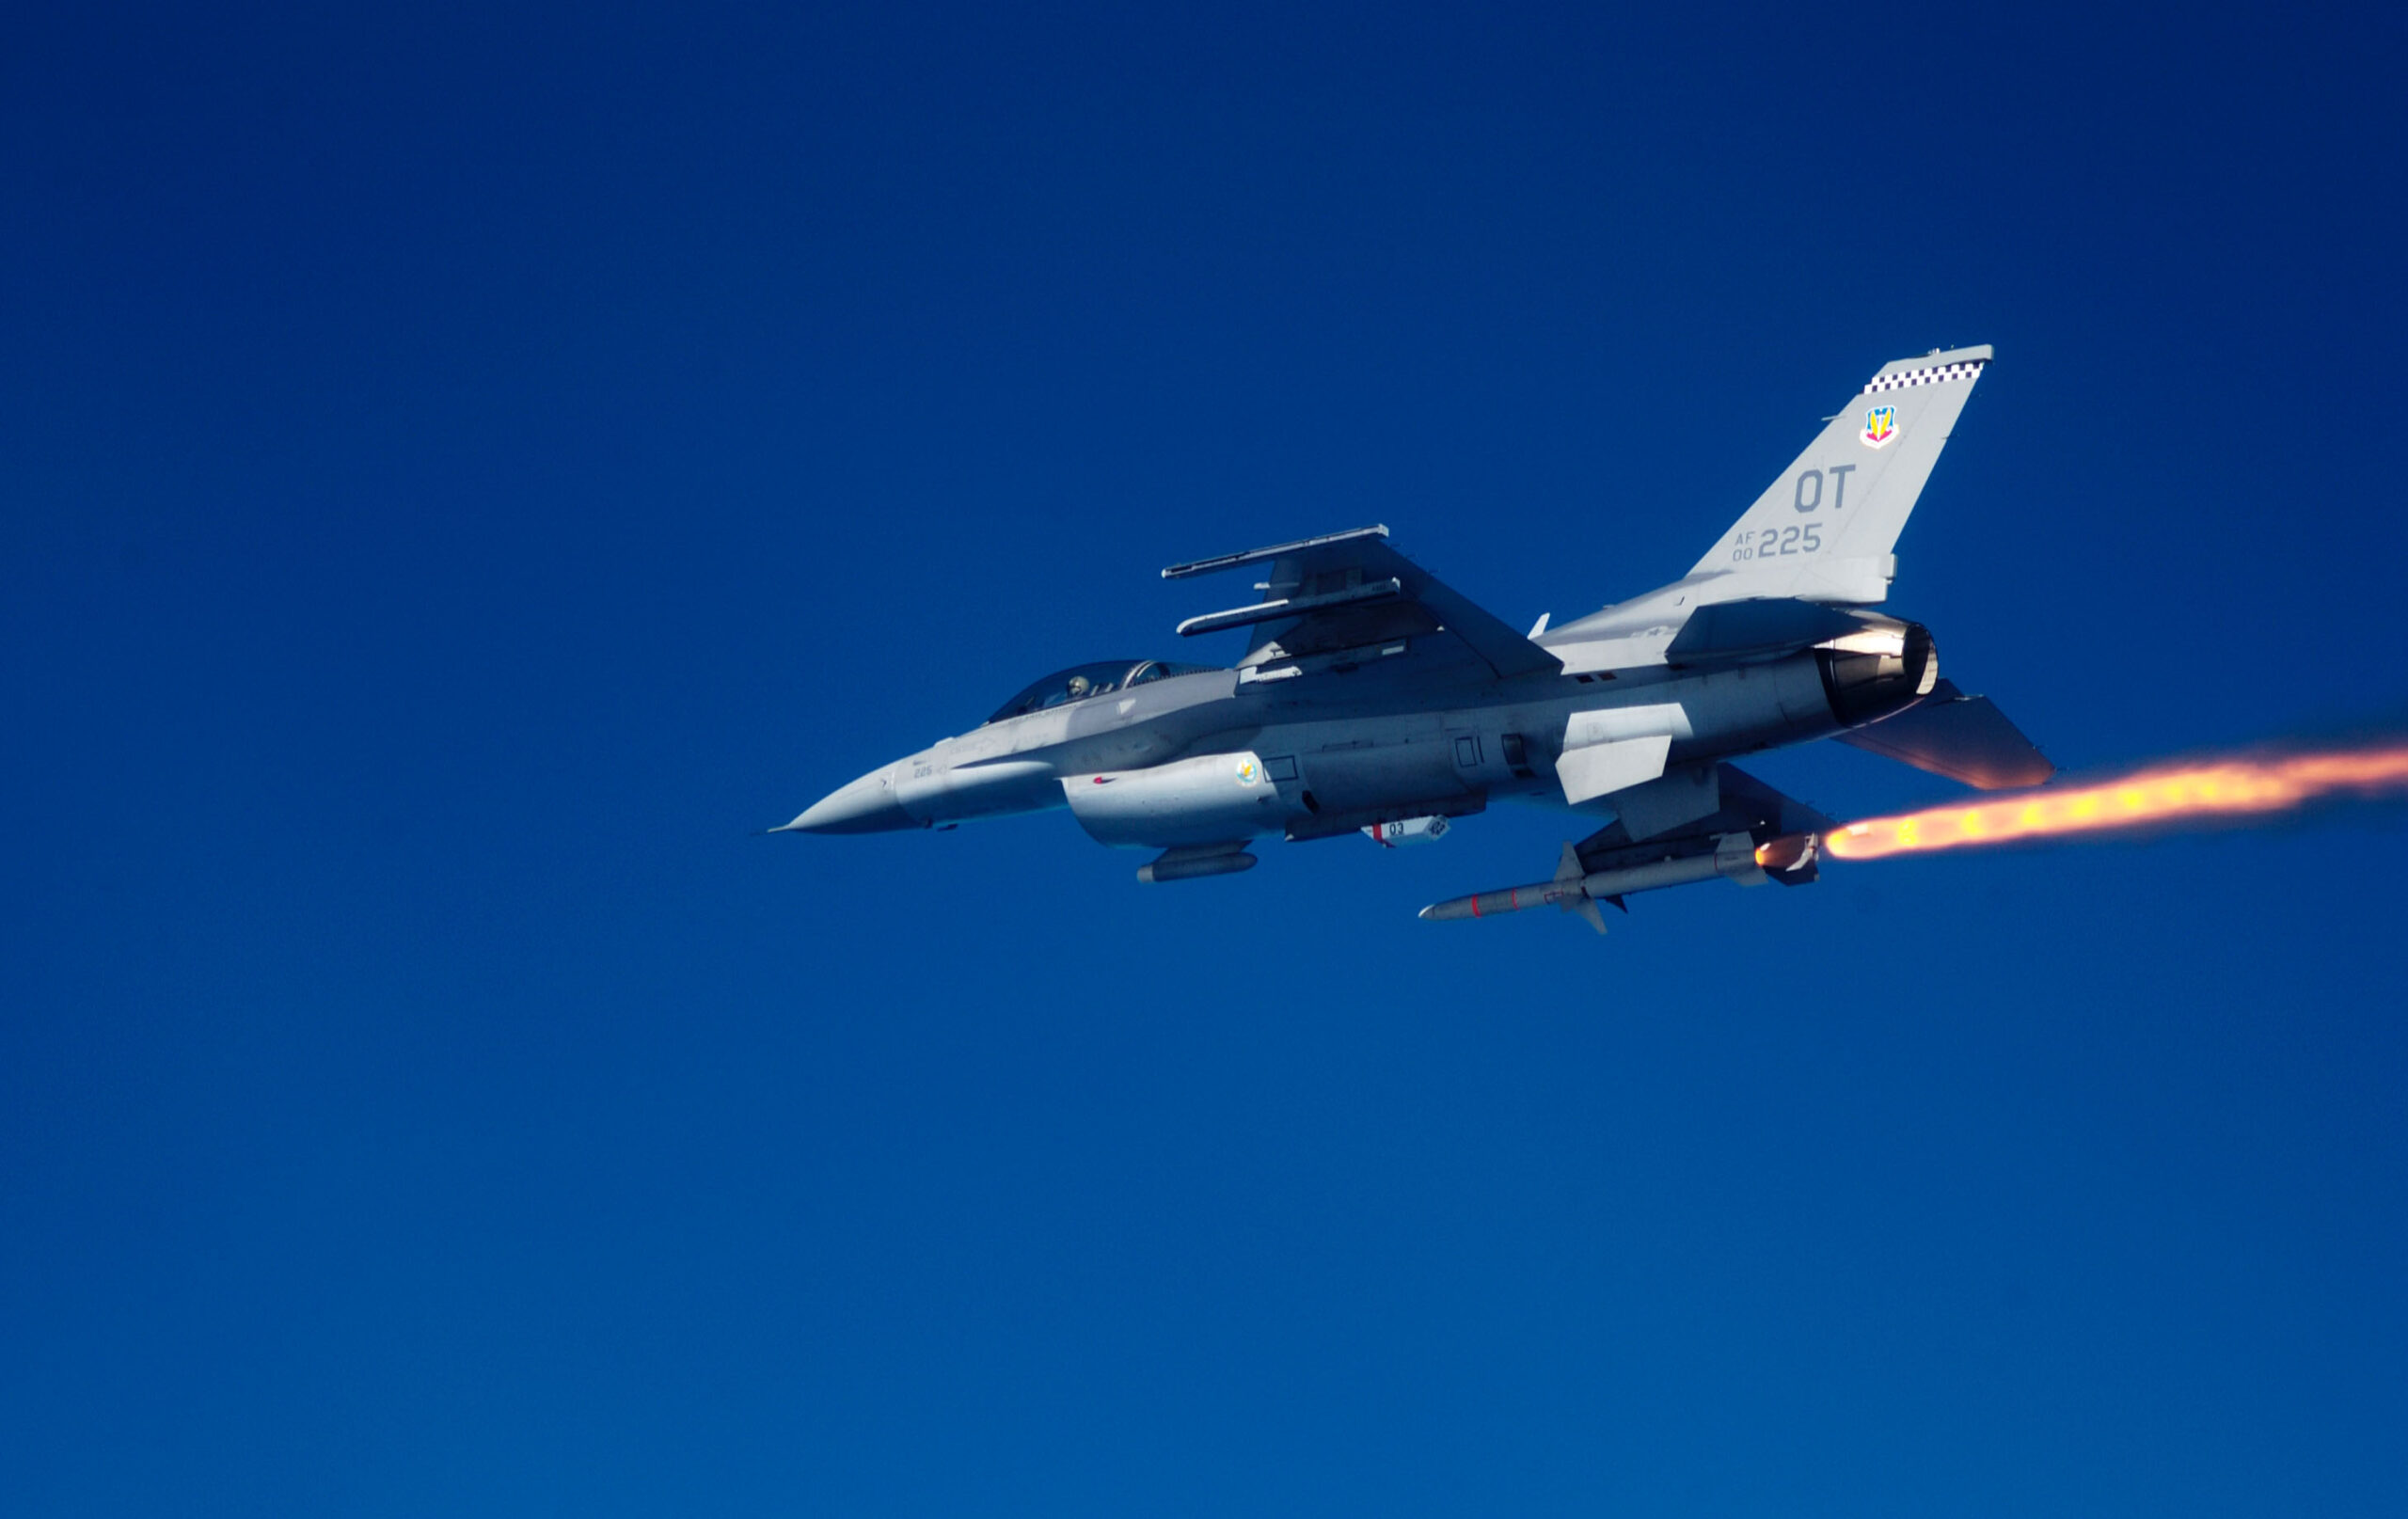 F-16C Fighting Falcon firing an AGM-88 high-speed antiradiation missile at a target during a test mission